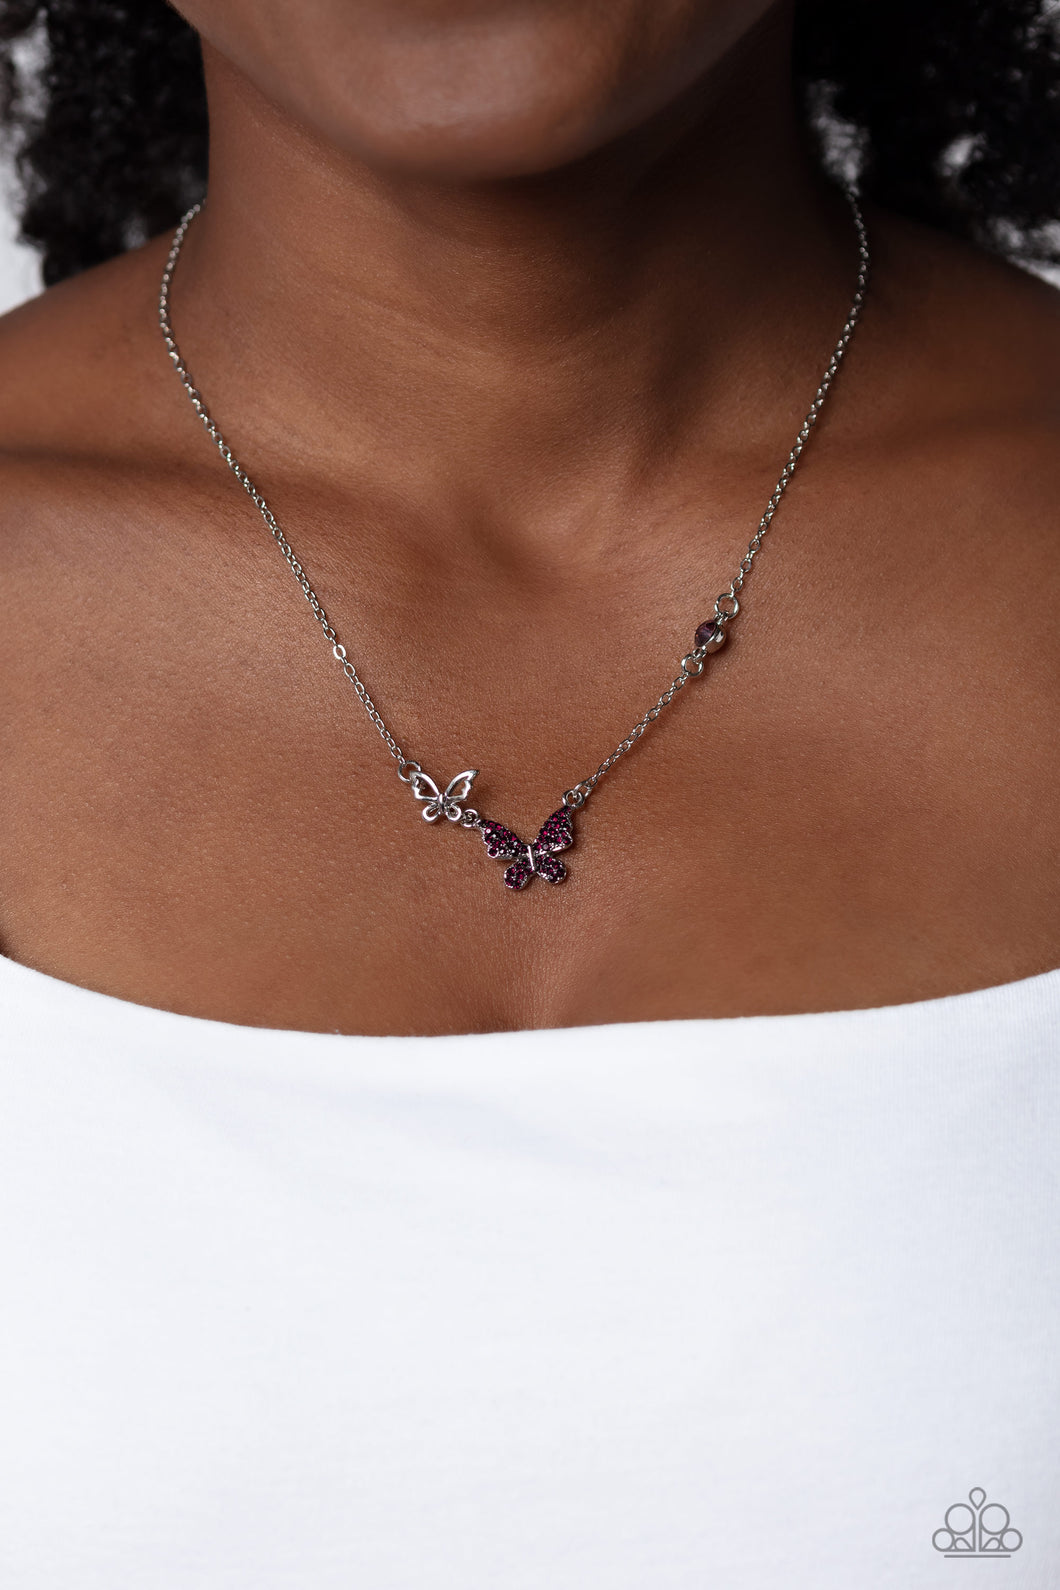 Paparazzi “Cant BUTTERFLY Me Love” Purple Butterfly Necklace